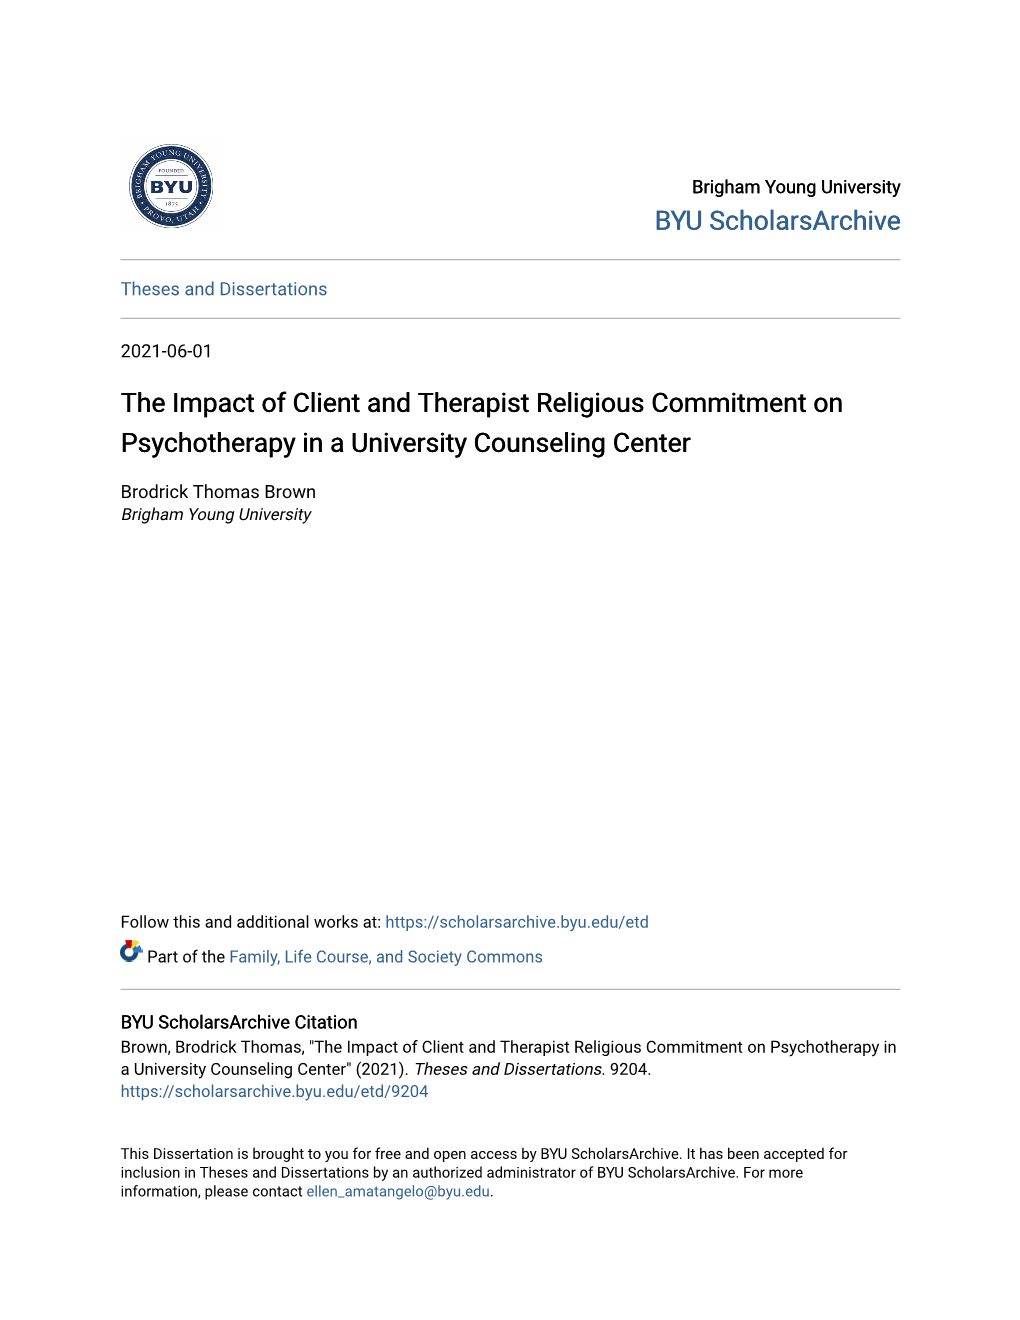 The Impact of Client and Therapist Religious Commitment on Psychotherapy in a University Counseling Center